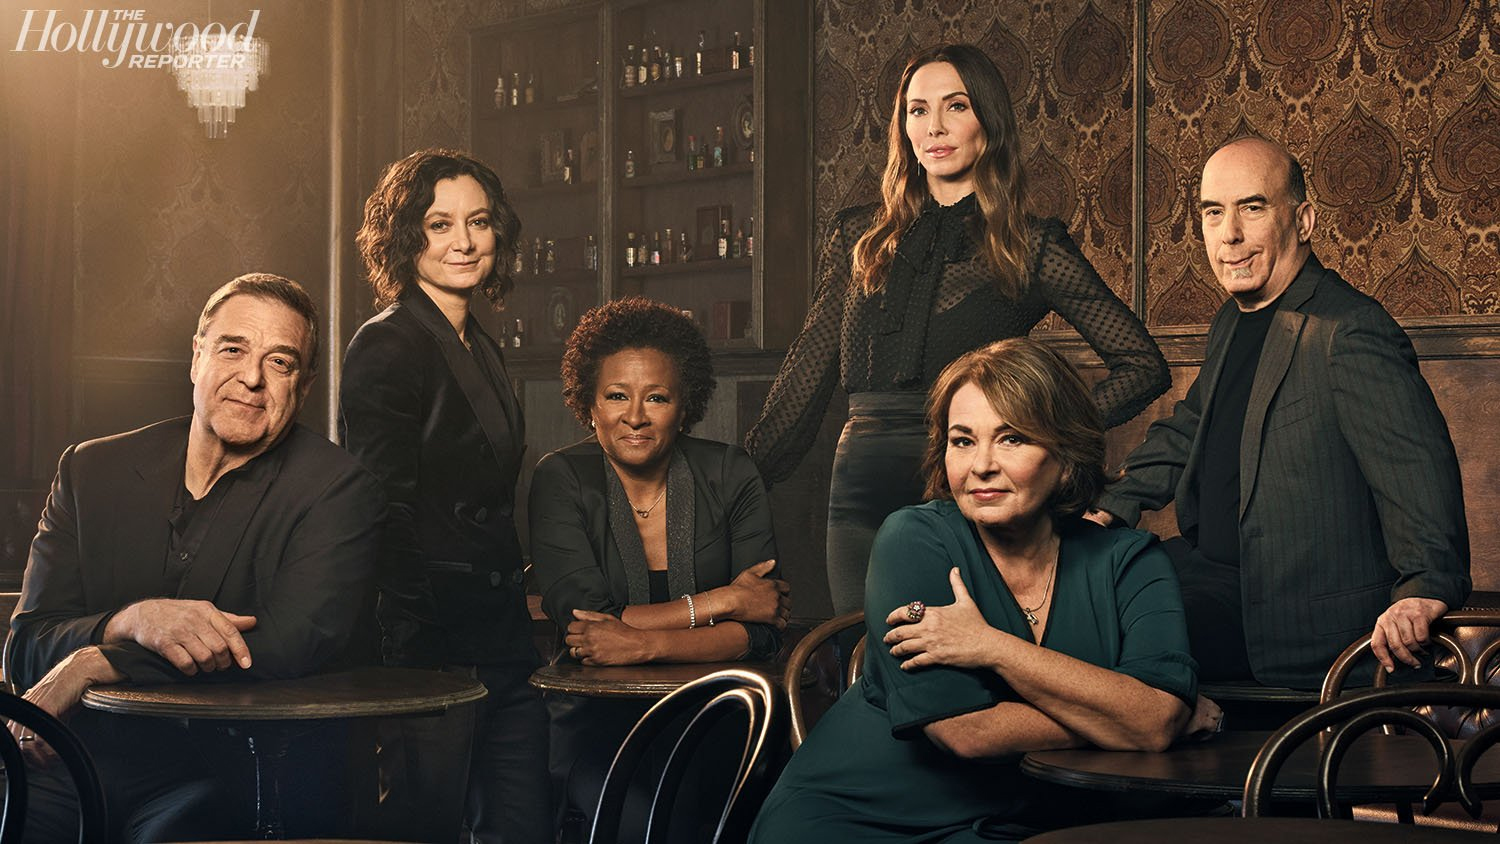 The Hollywood Reporter Portrait - Roseanne's Cast and Showrunners